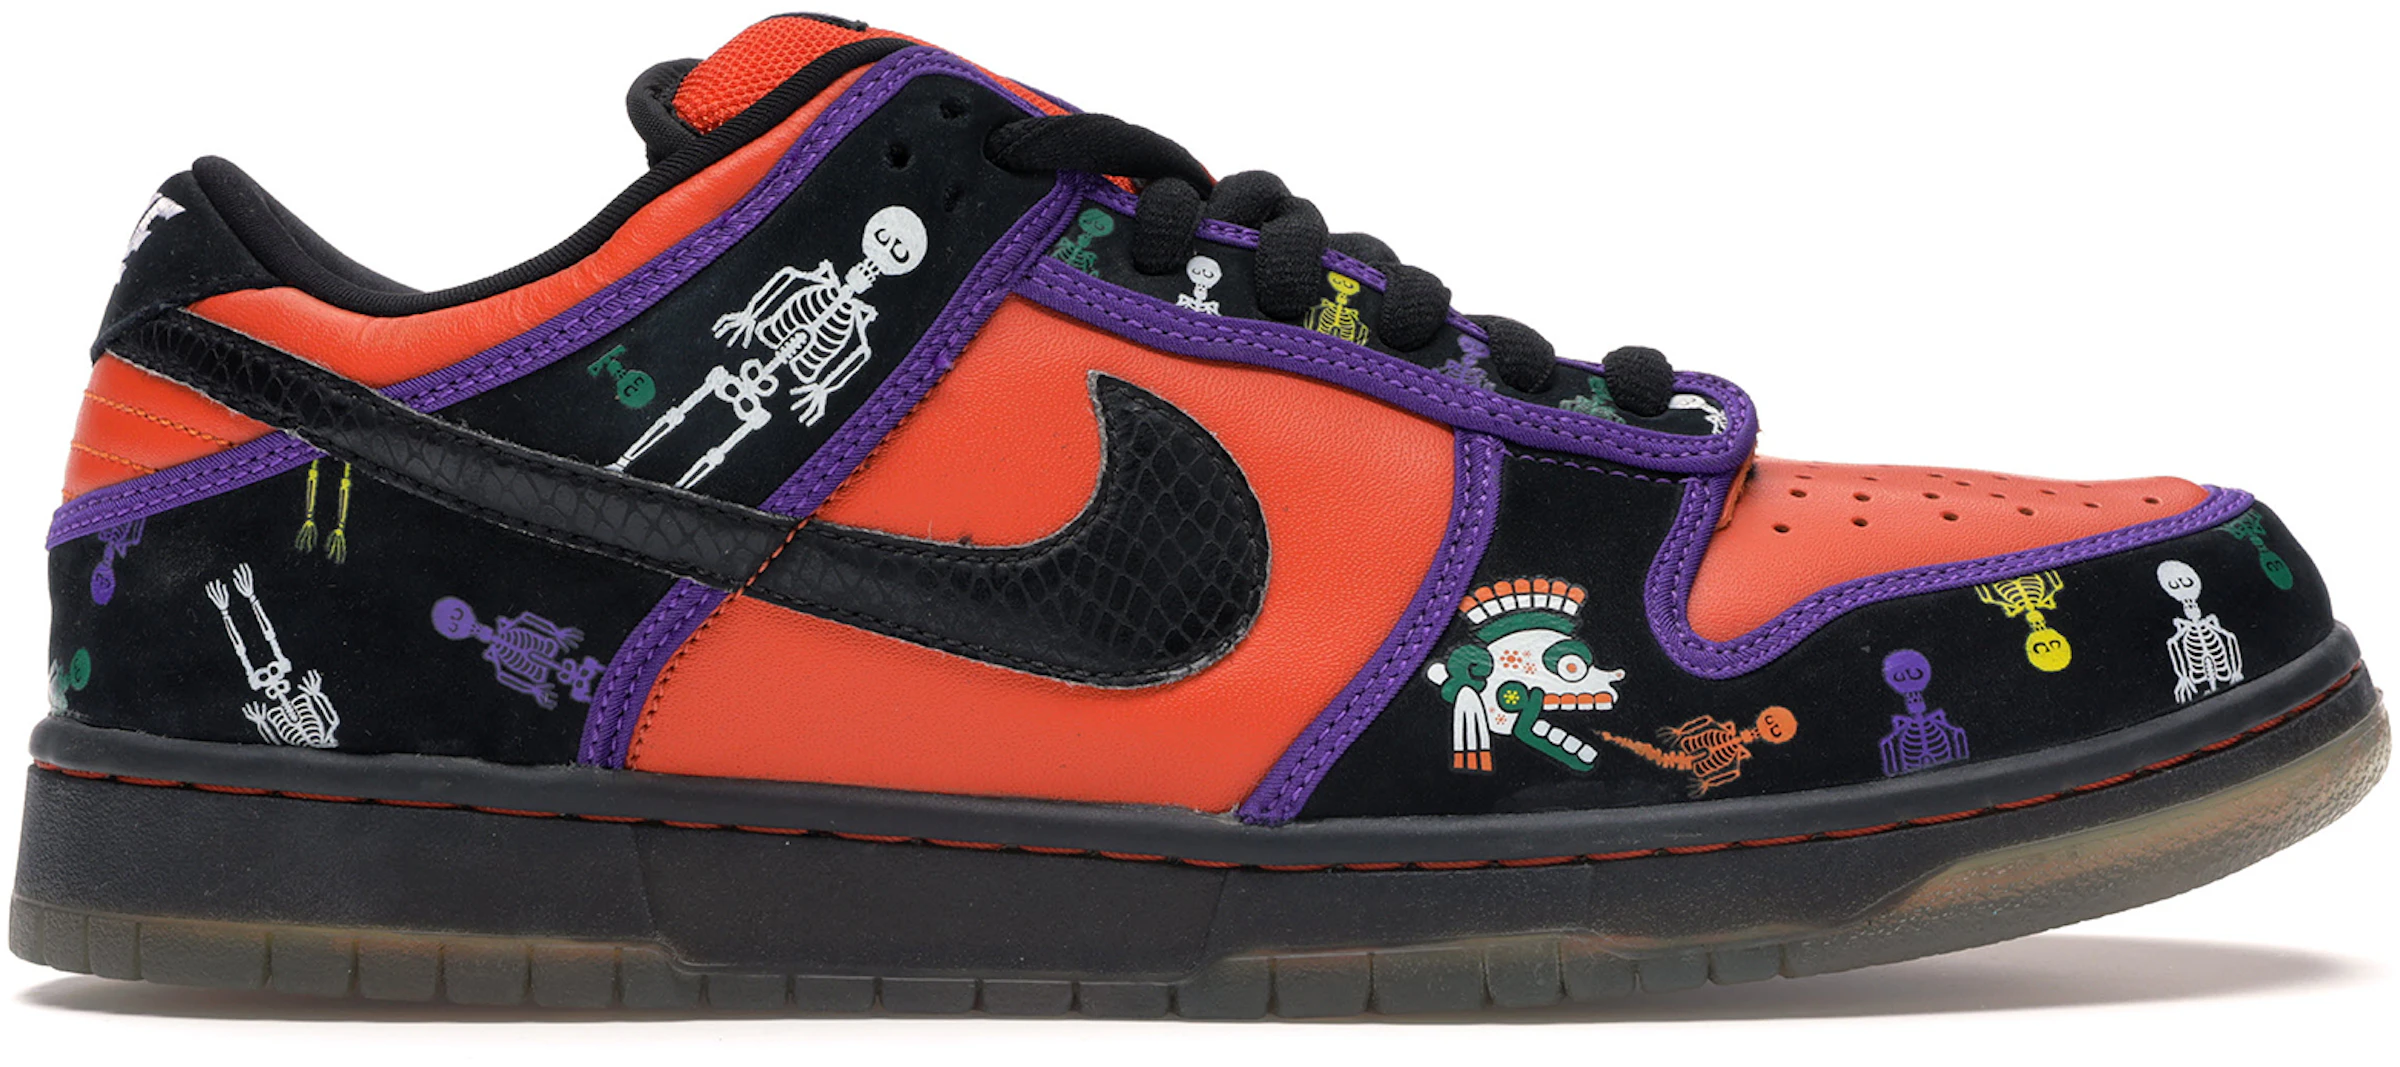 Noble idioma Contratista Nike SB Dunk Low Day of the Dead - 313170-801 - ES